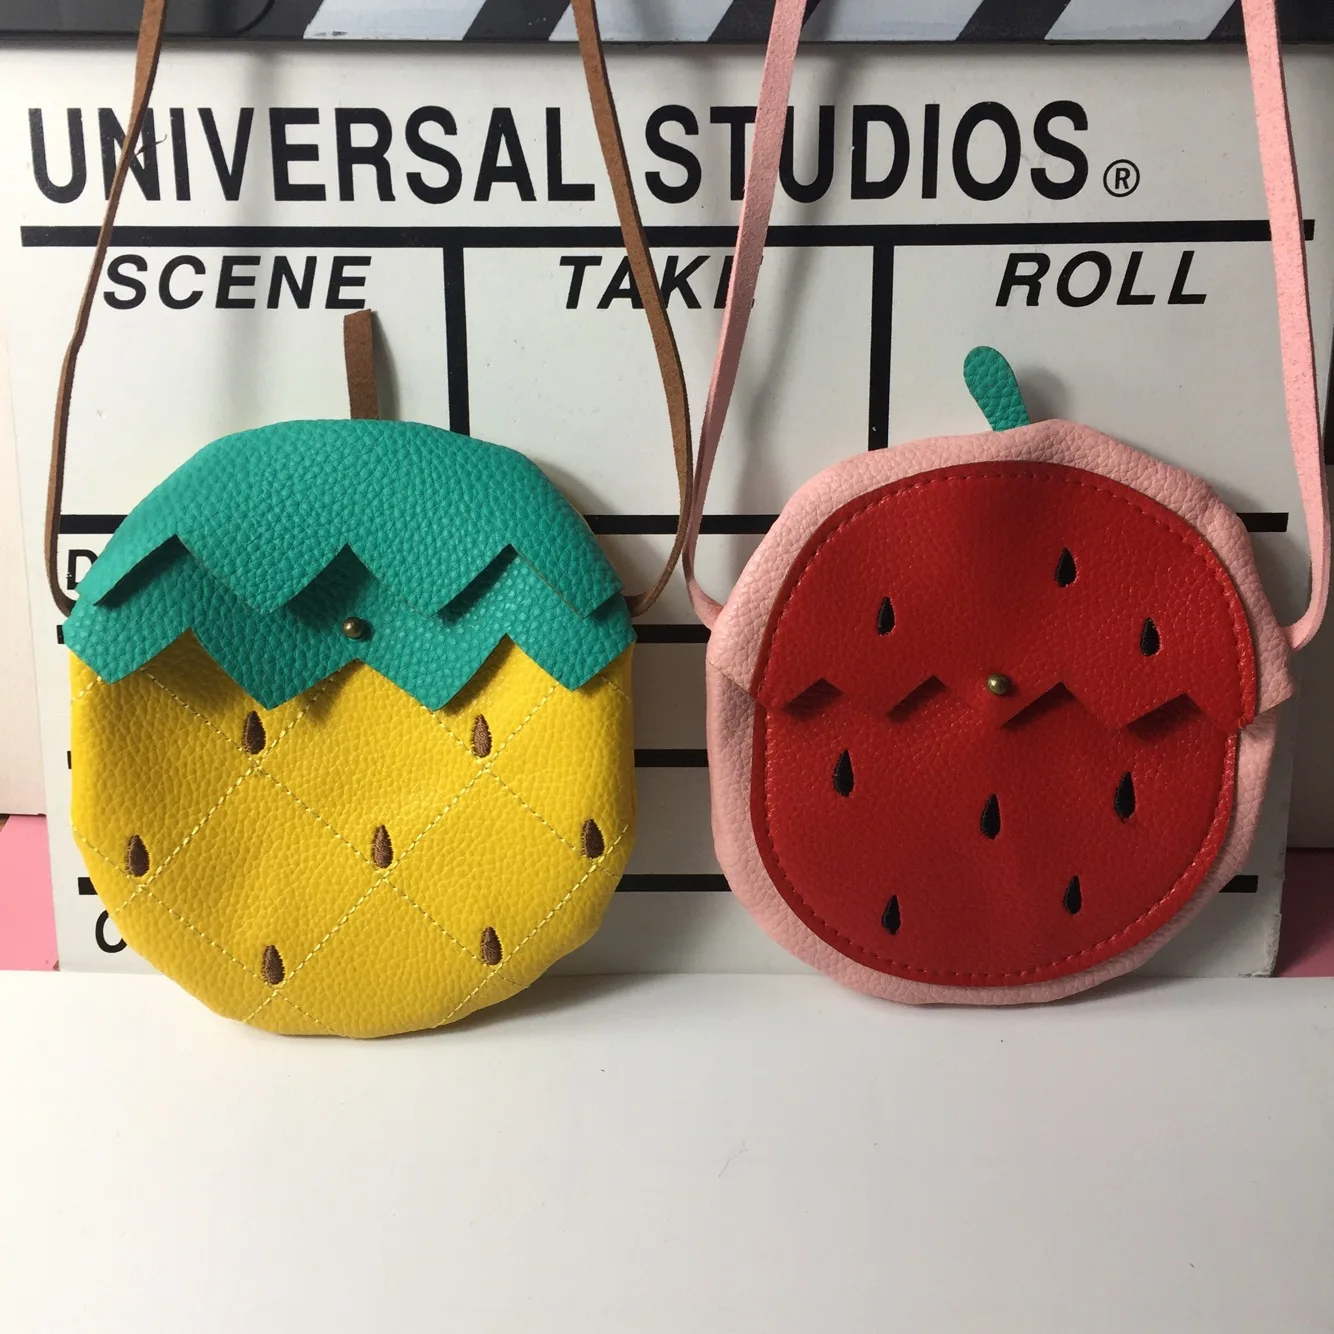 

Cute Baby Mini Coin Bag Fruit Watermelon/pineapple Kids Girls Small Zero Wallet Pouch Toddler Accessories Shoulder Bag Gift